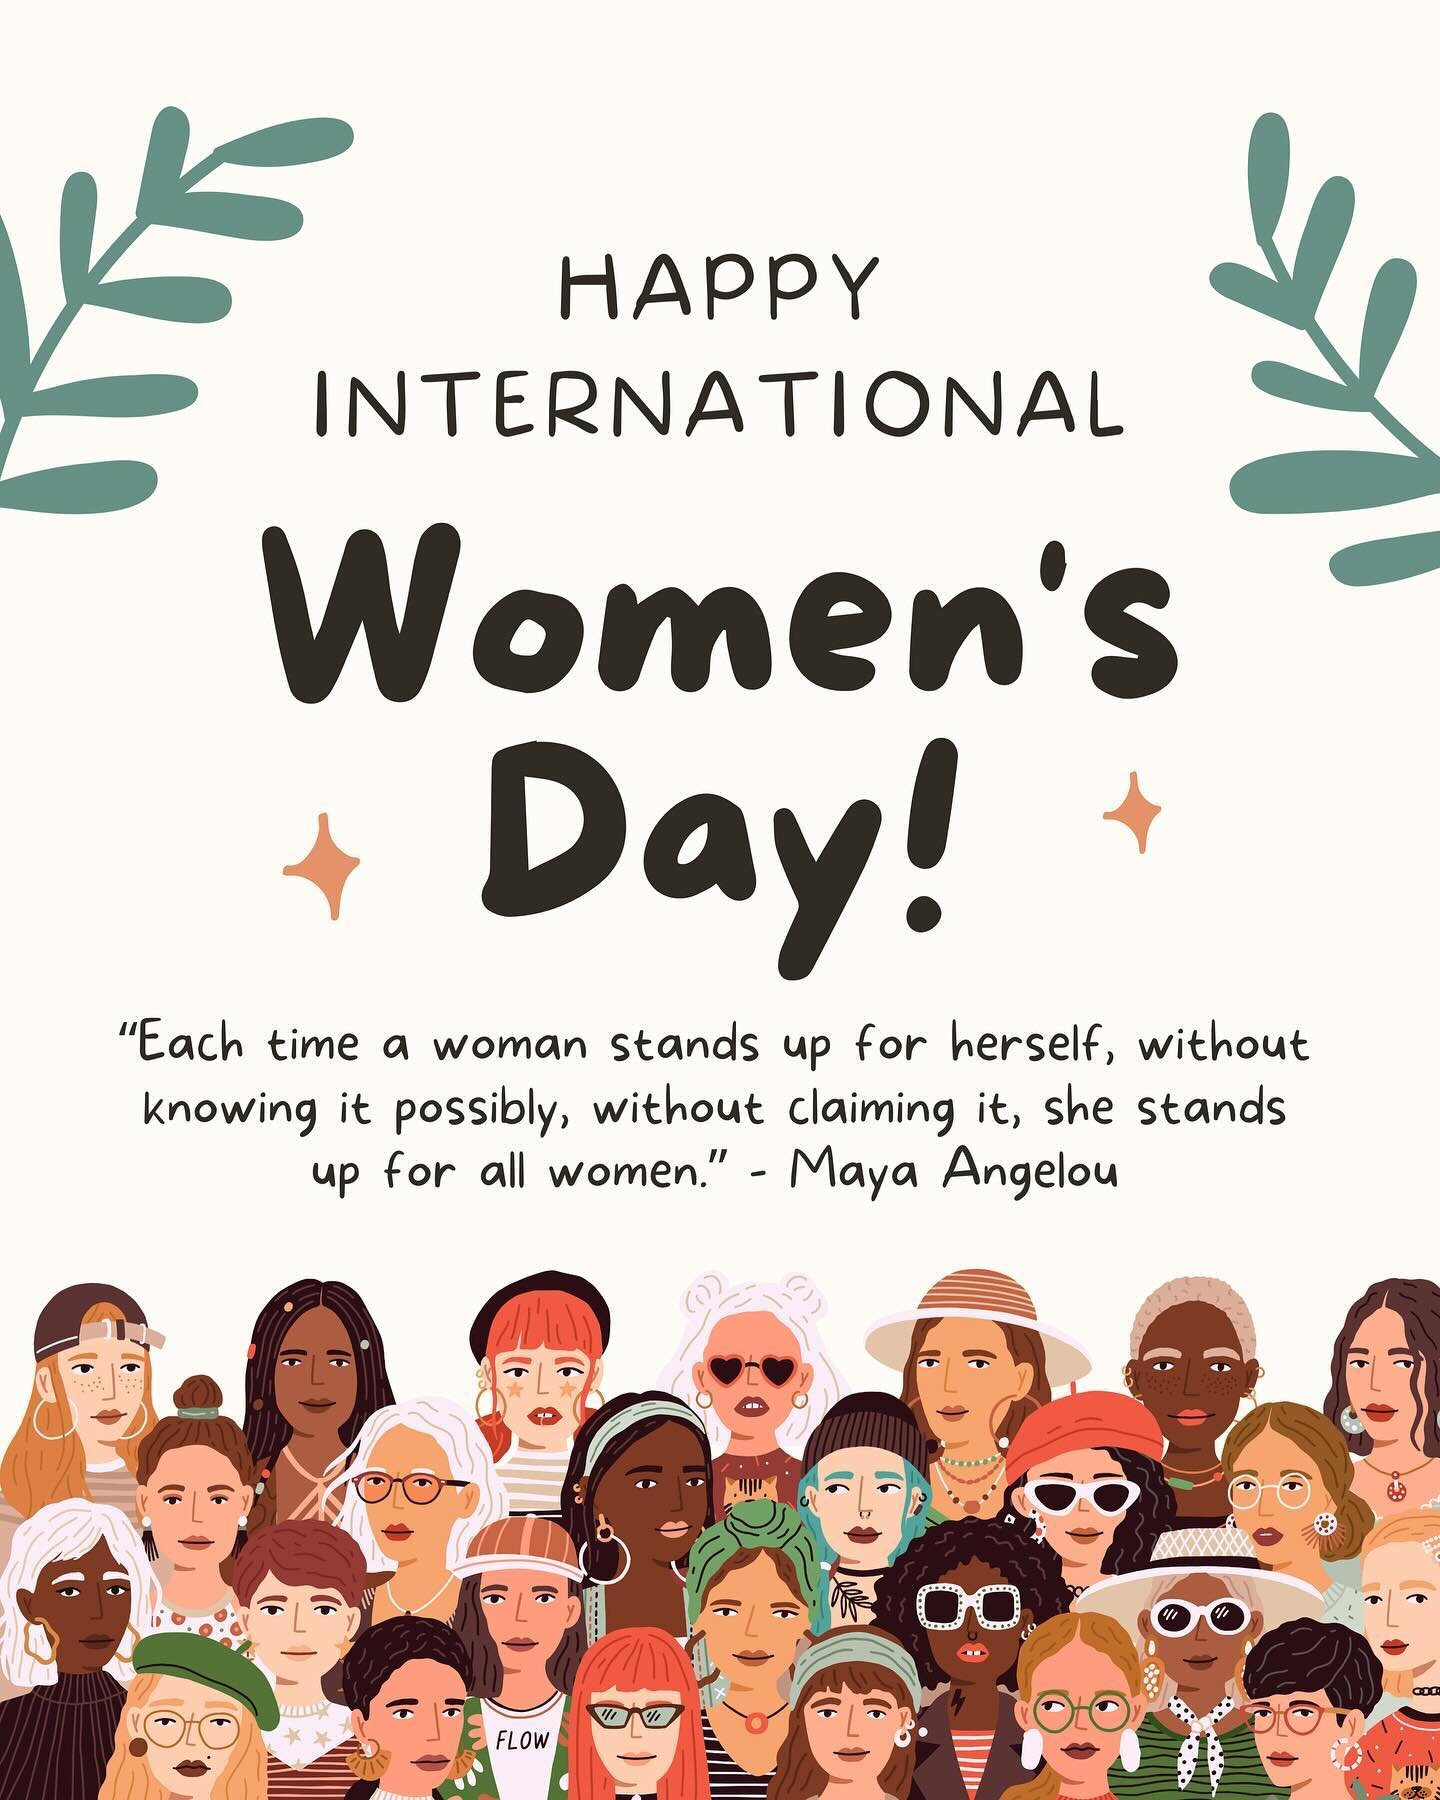 🫶🏼 HAPPY INTERNATIONAL WOMENS DAY 💐
&bull;
today is a day that&rsquo;s very special to us at wholehearted support. it means different things to everybody, but to us - it&rsquo;s a wonderful way to reflect on how far women&rsquo;s rights have come,